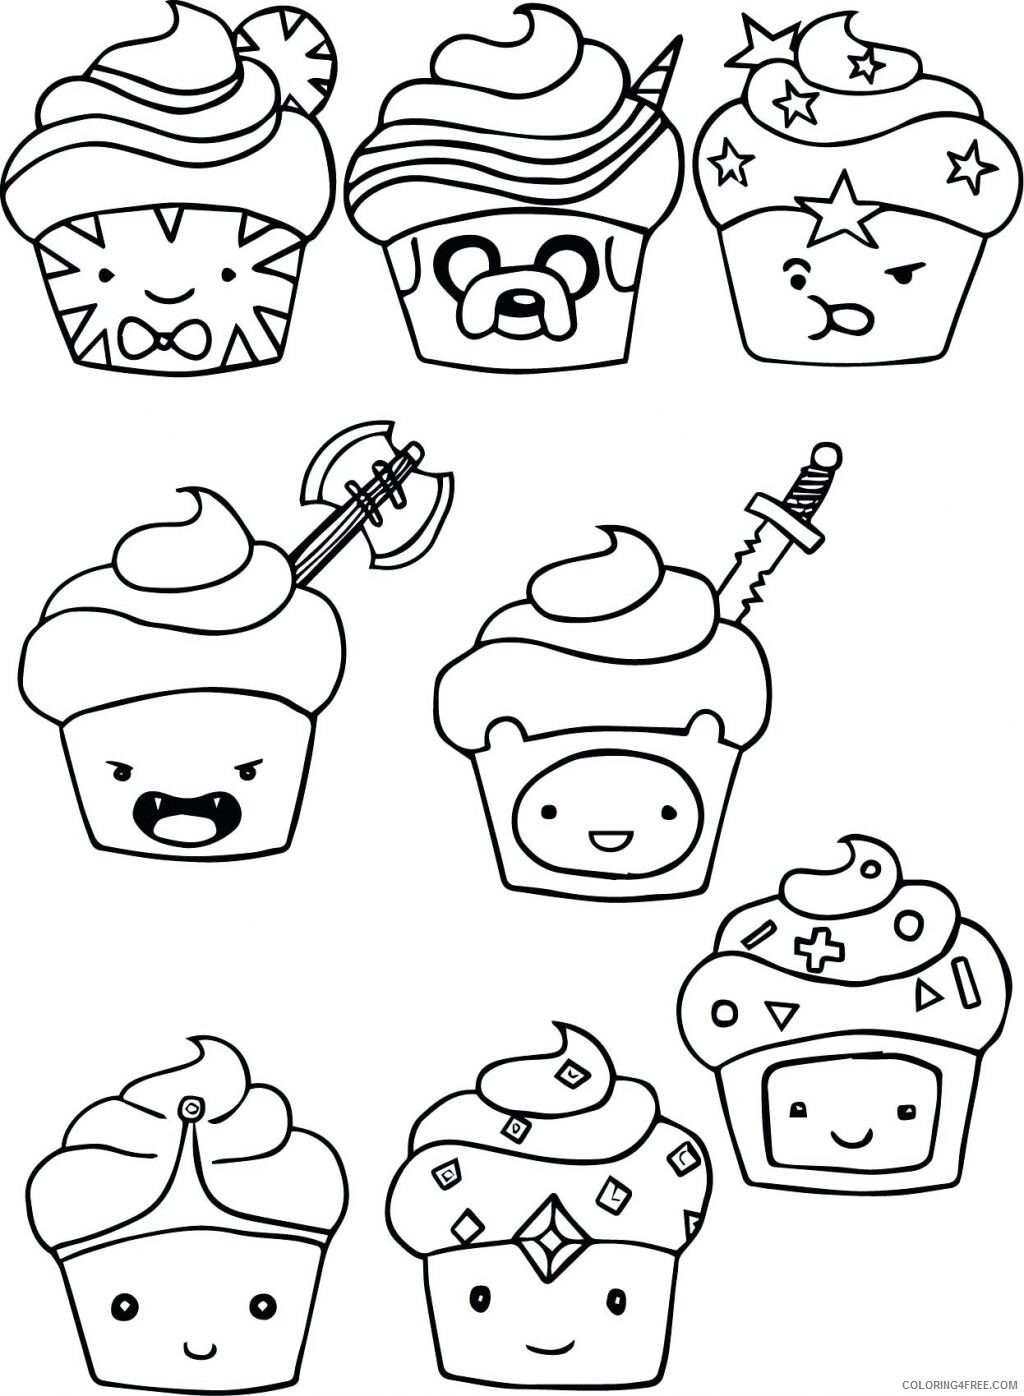 Shopkins Coloring Pages for Girls Shopkins Cartoon Printable 2021 1246 Coloring4free